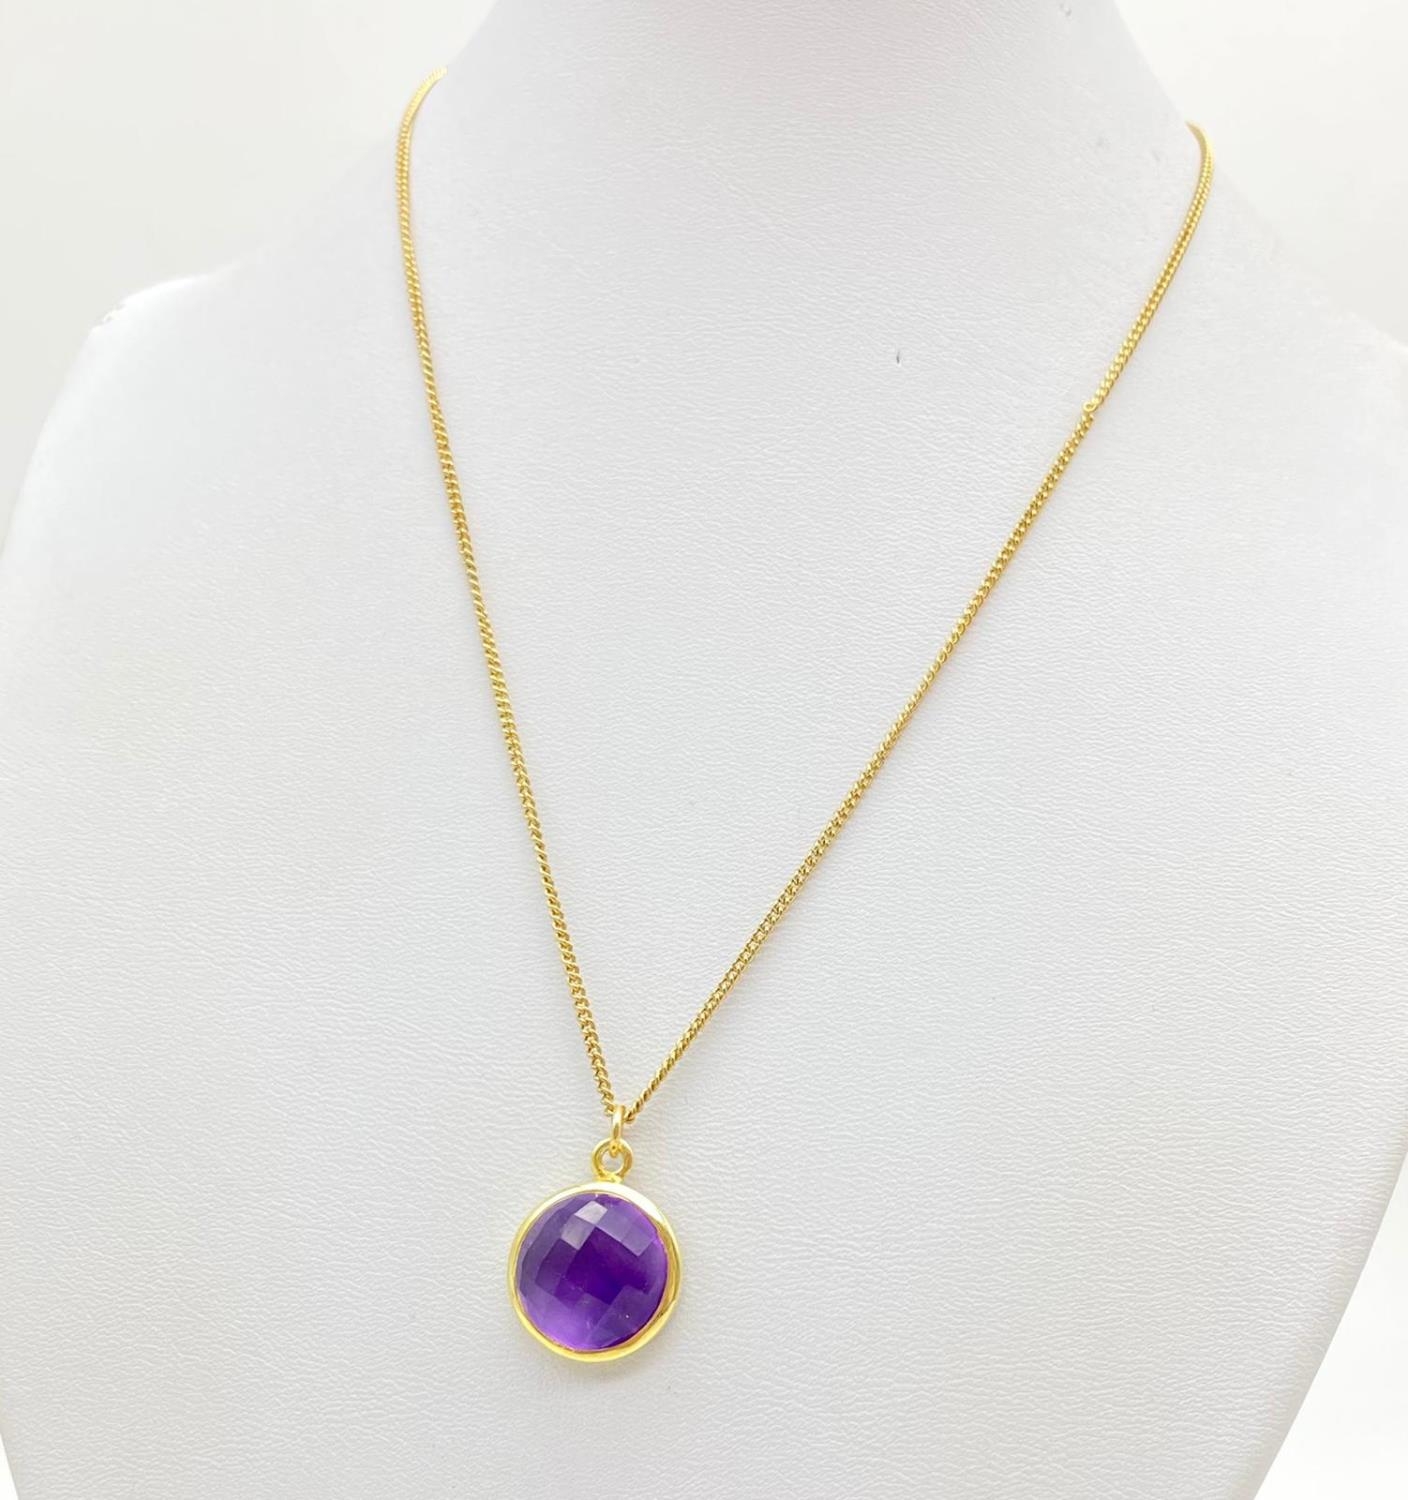 Natural Amethyst Pendant on a Yellow Metal Necklace. 42cm. 5.7g